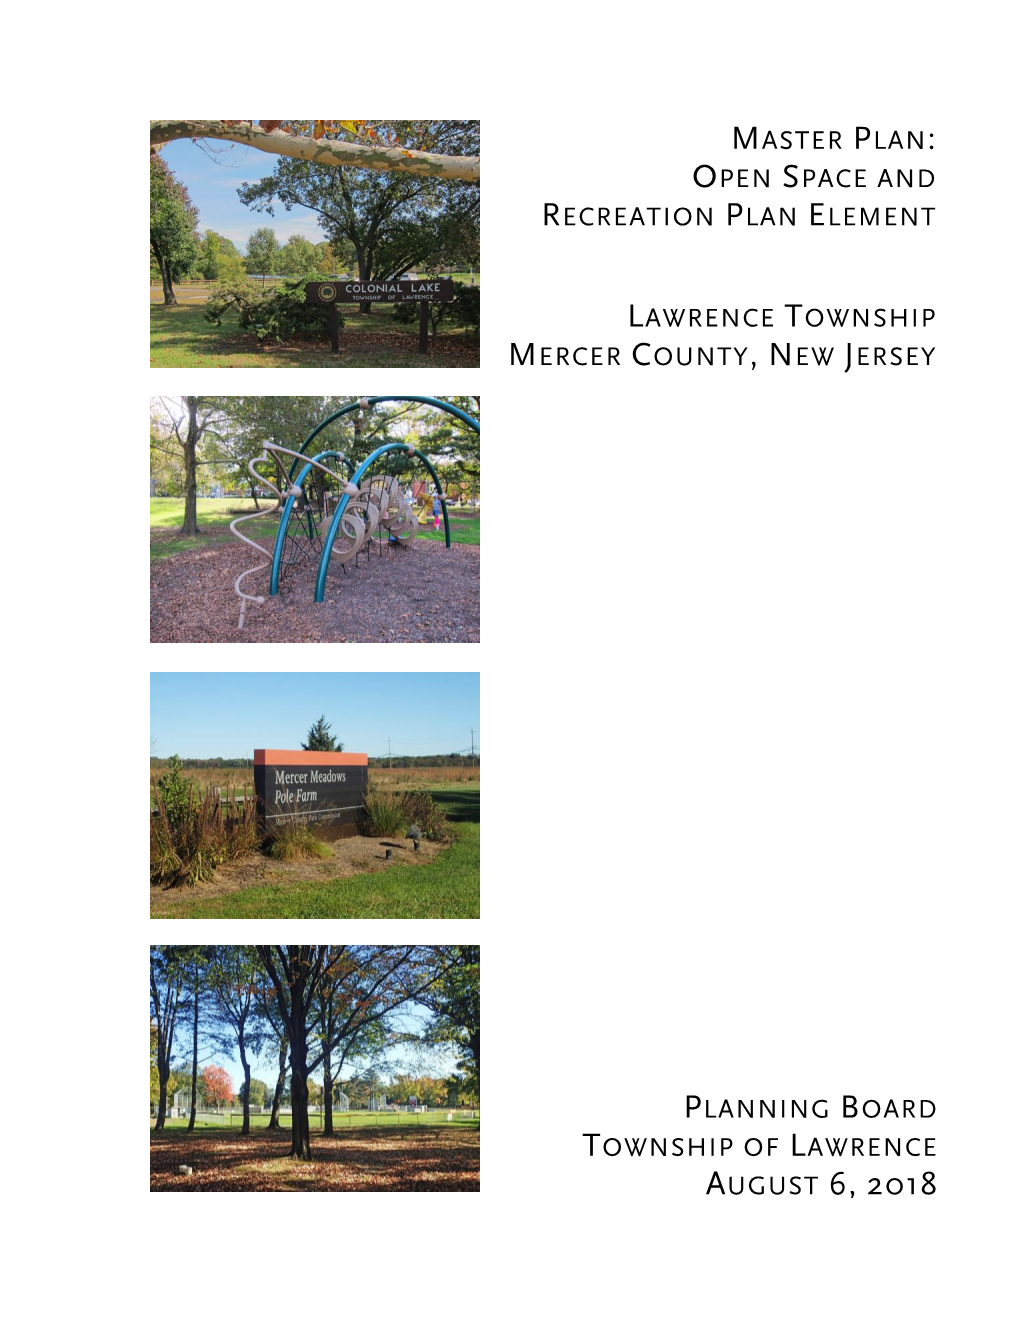 Open Space and Recreation Plan Element, Dated August 6, 2020